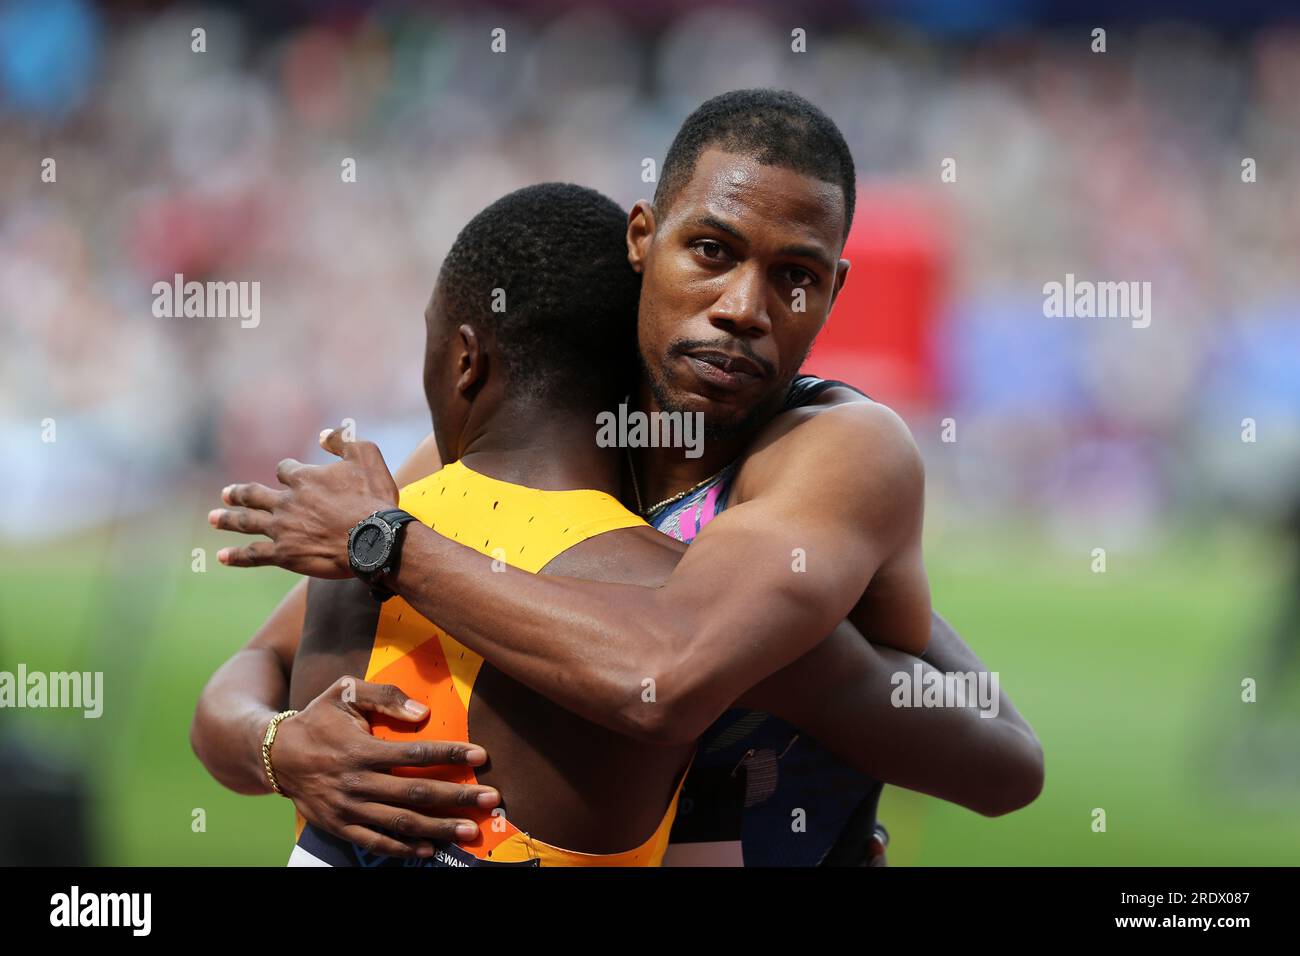 London, UK. 23rd July 23. Zharnel HUGHES (Great Britain) after setting a new National Record in the Men's 200m Final at the 2023, IAAF Diamond League, Queen Elizabeth Olympic Park, Stratford, London, UK. Credit: Simon Balson/Alamy Live News Stock Photo